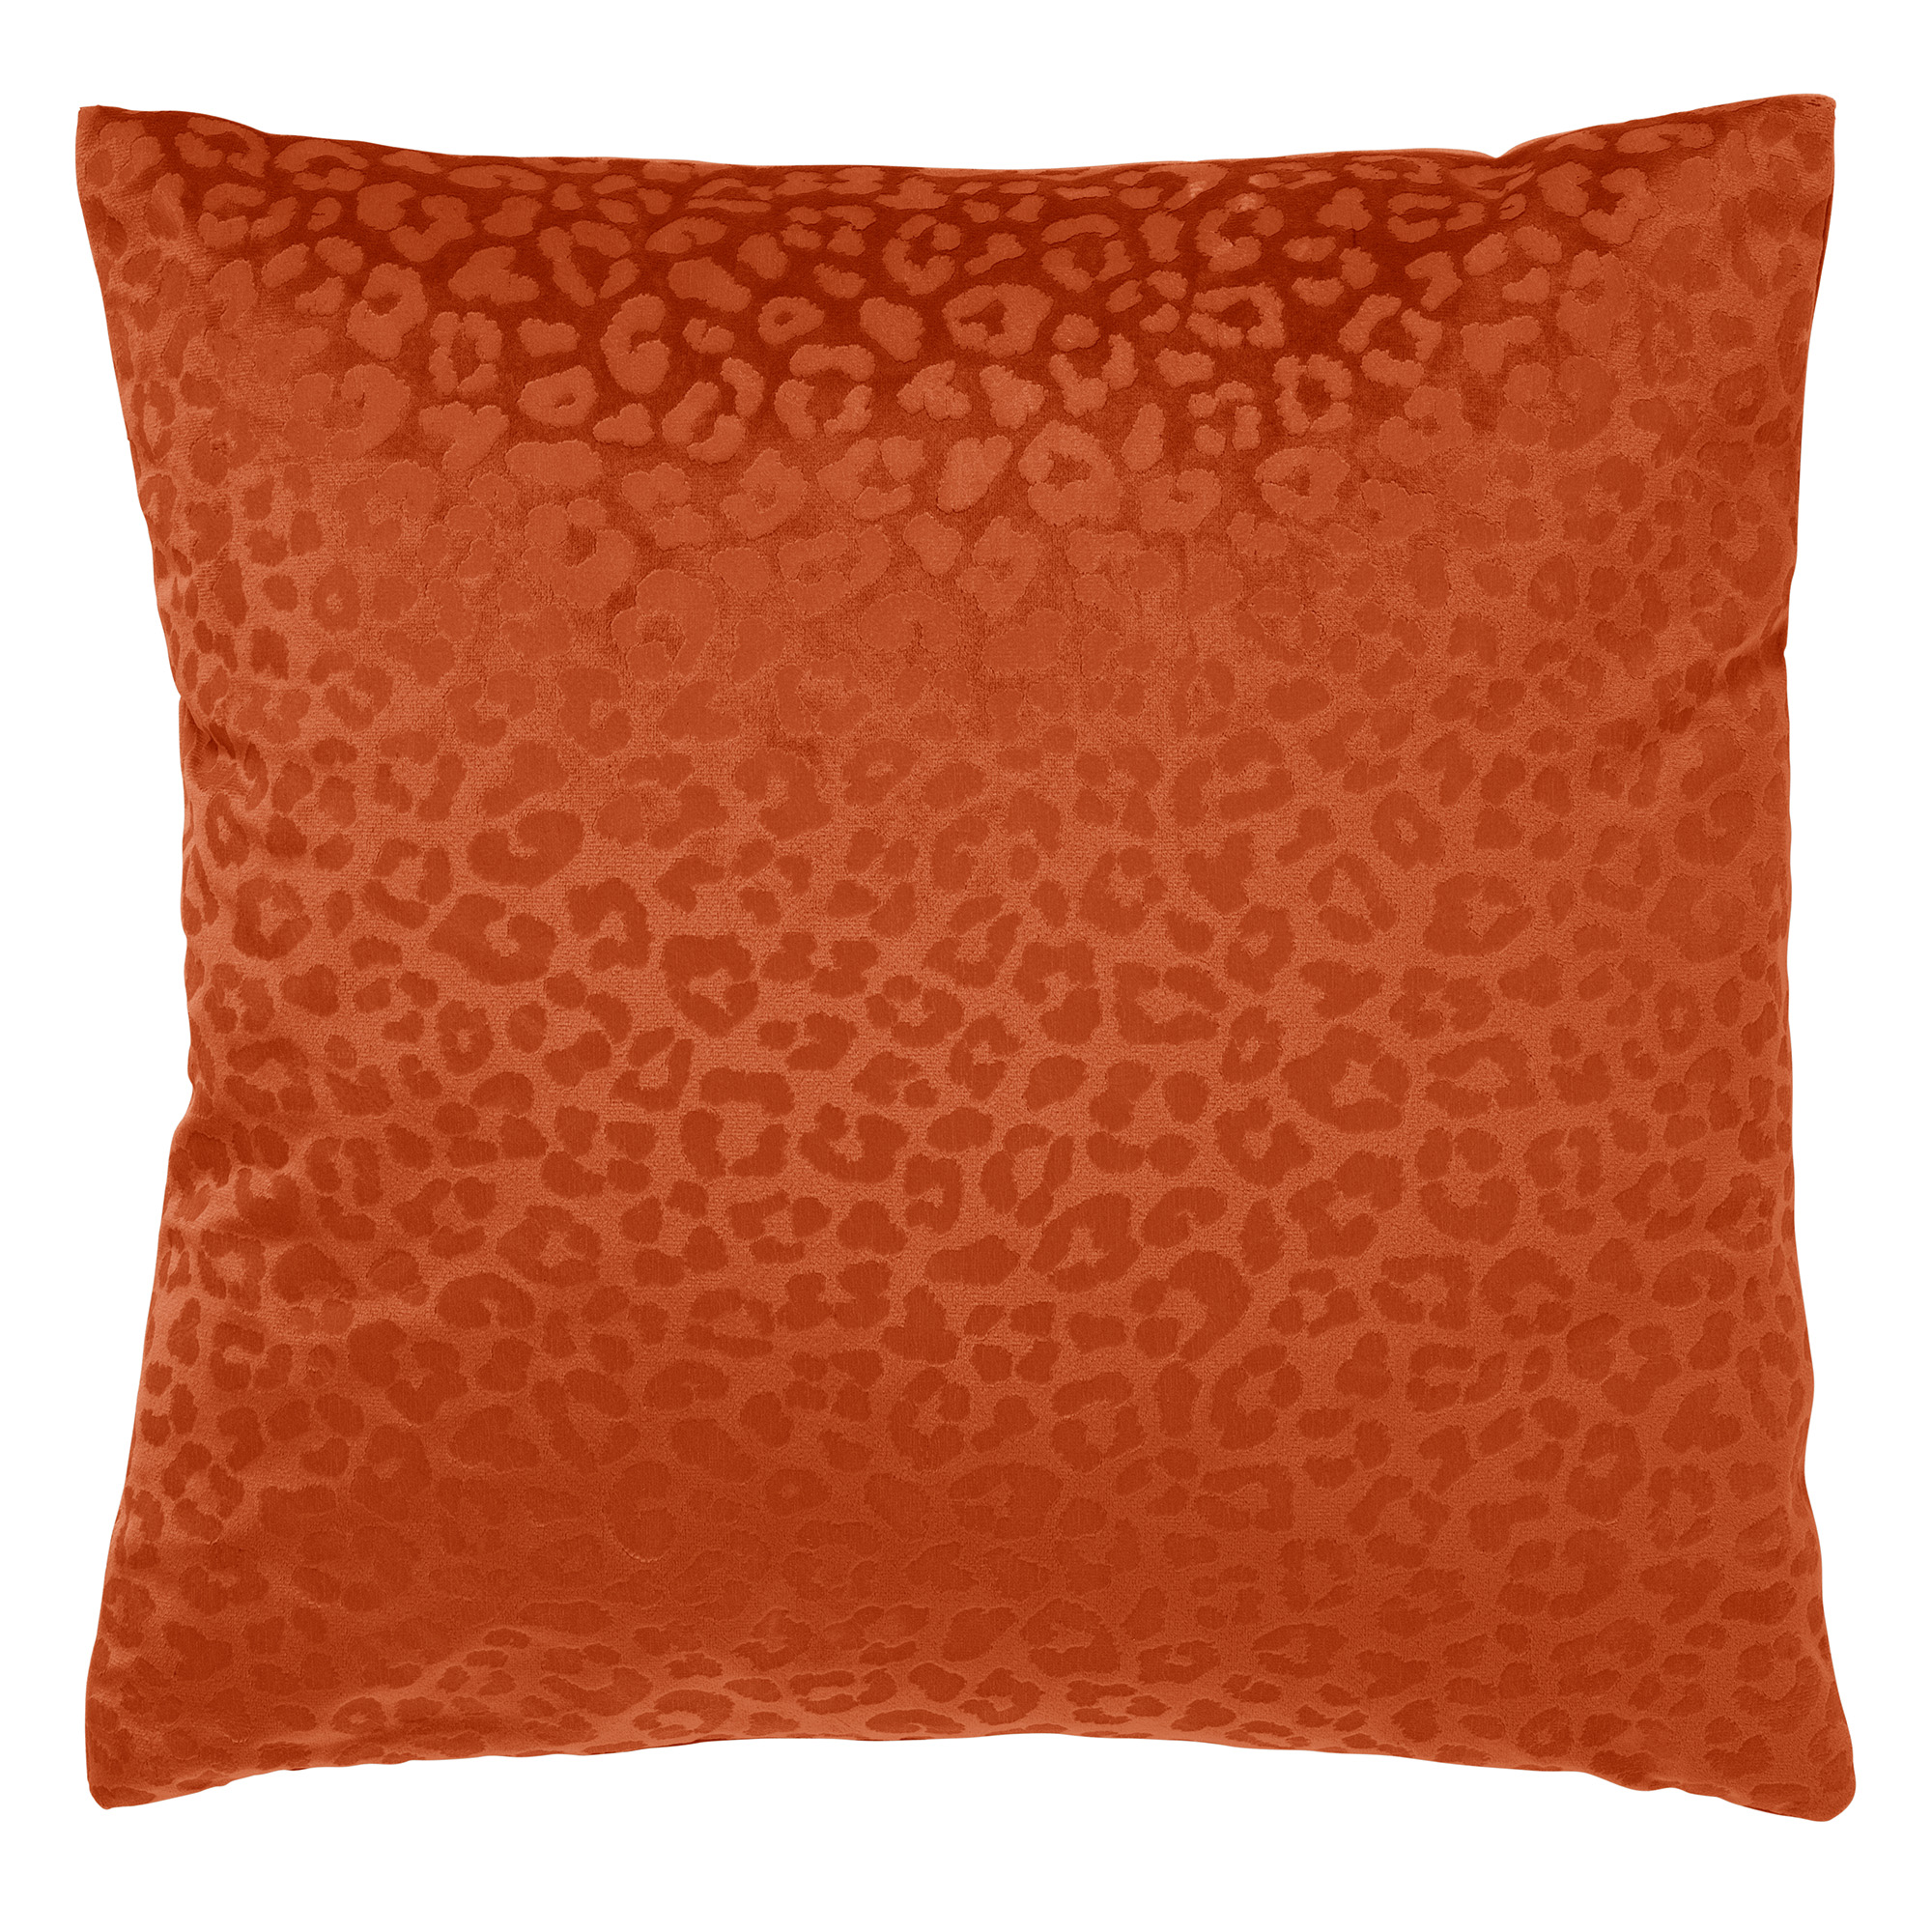 CHESSY - Cushion cover with animal print 45x45 cm Potters Clay